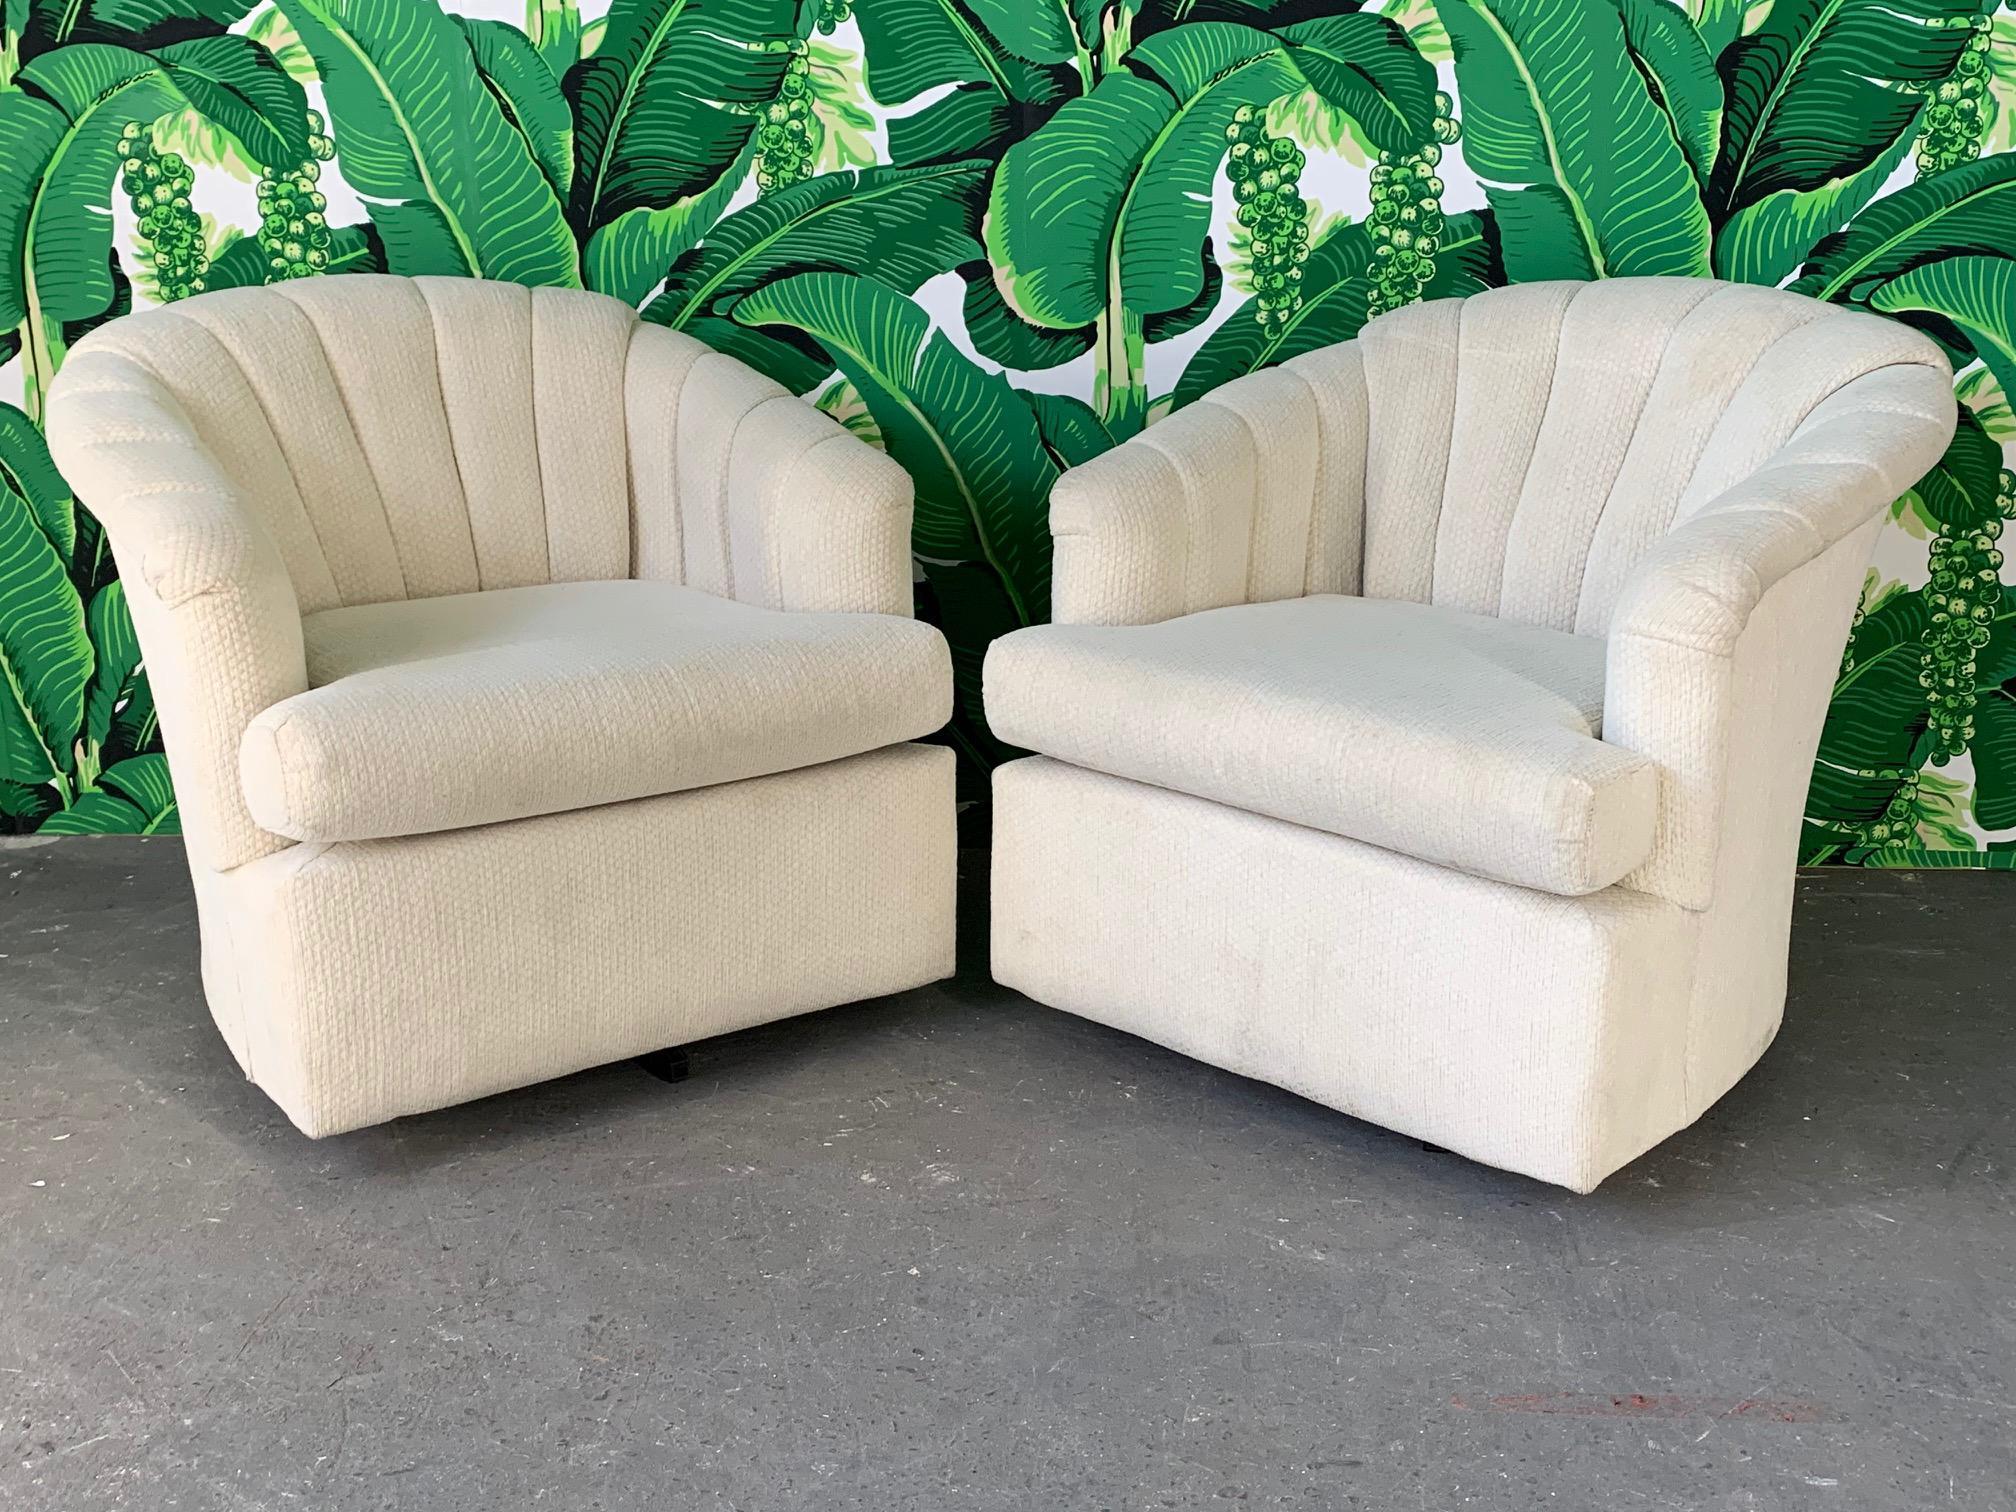 Pair of swivel club chairs featuring channel back upholstery in a textured white fabric. Very comfortable and in good condition with minor imperfections consistent with age (see photos). Perfect addition to your Hollywood Regency decor.
   
    